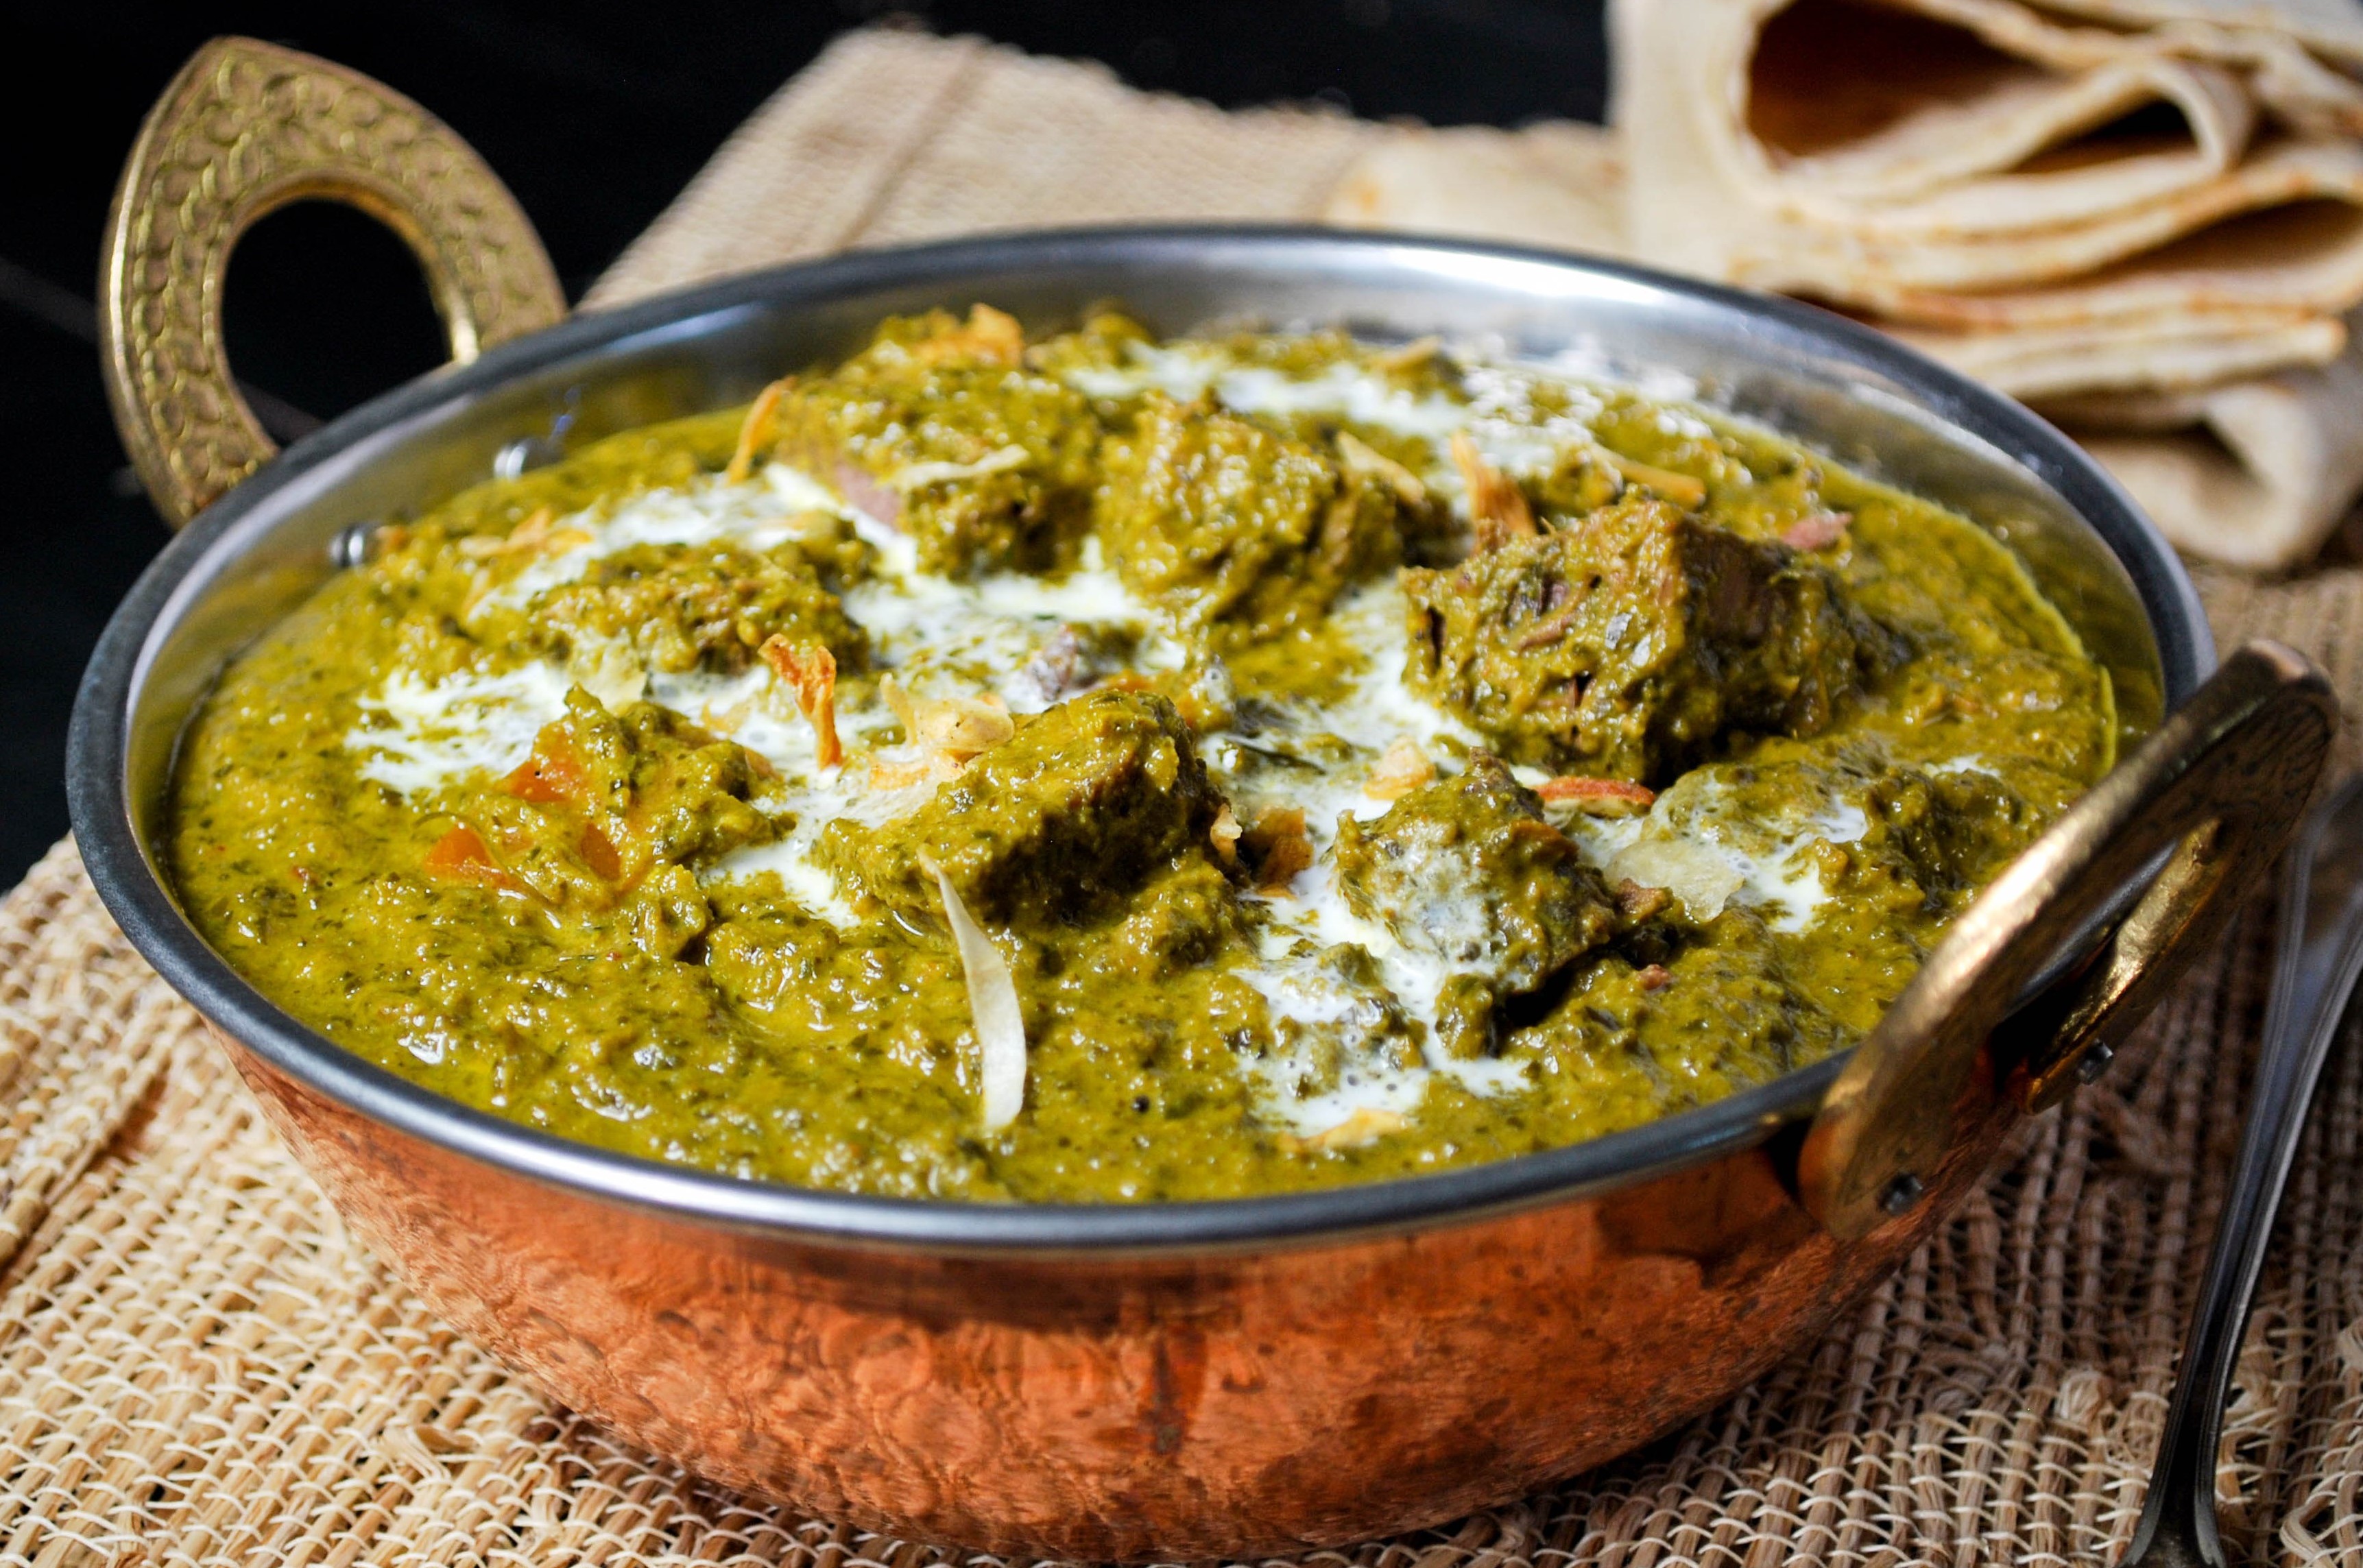 Lamb cooked in a delicately spiced spinach gravy